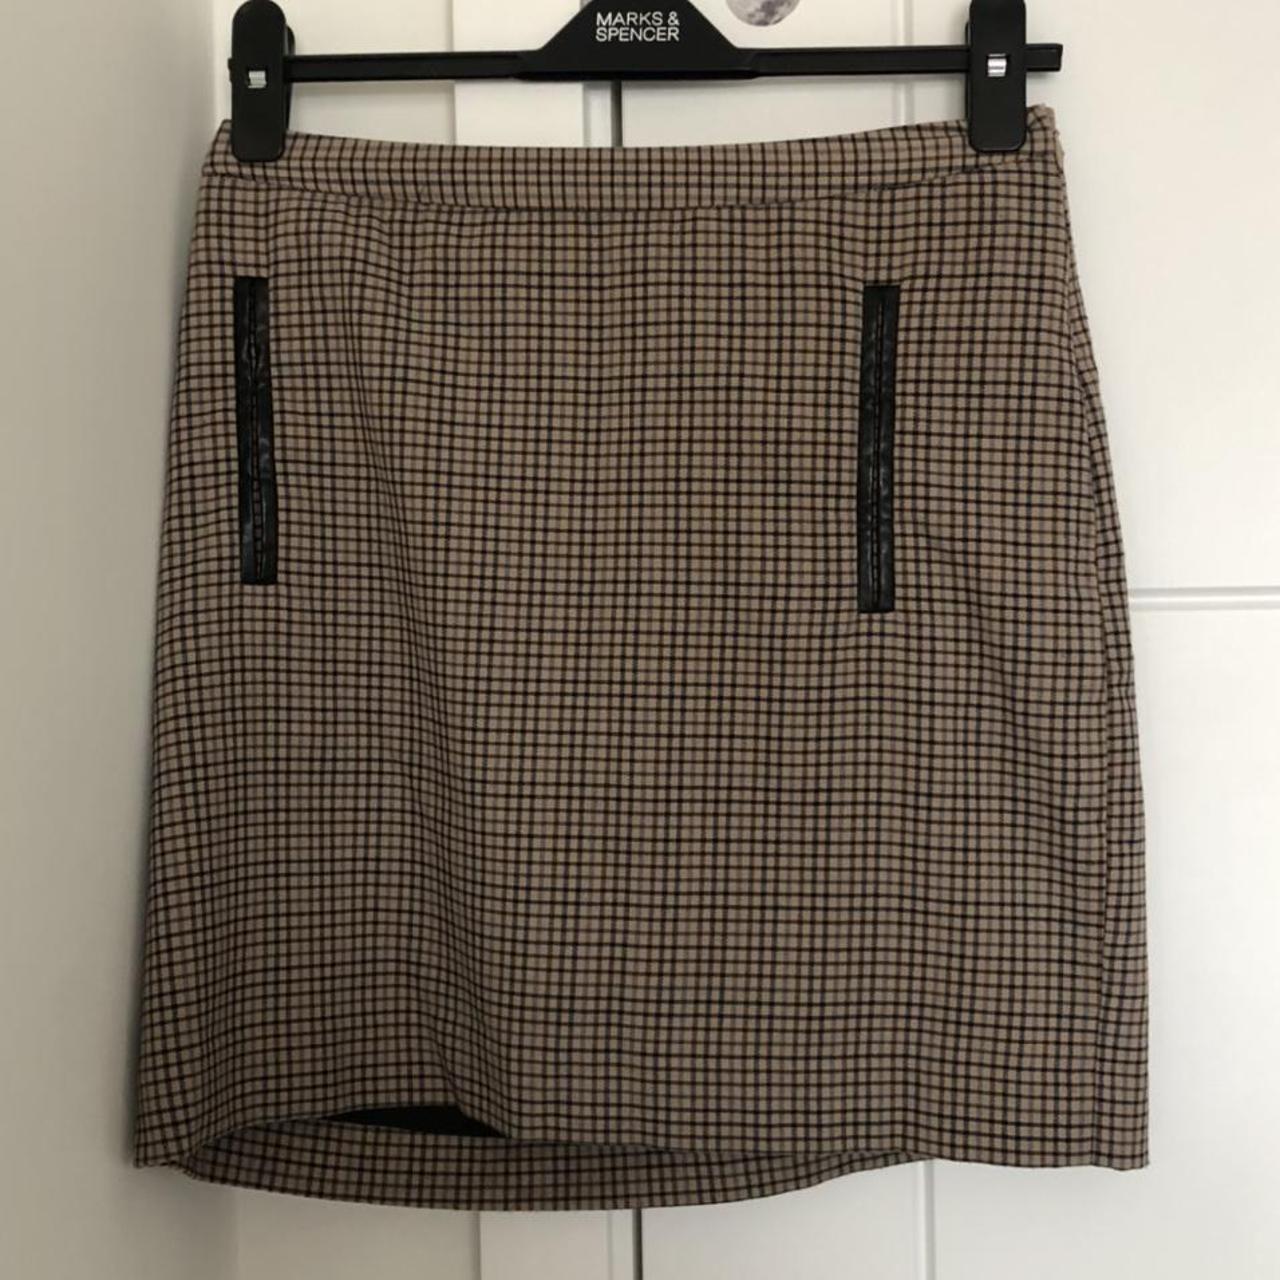 dark academia skirt, truly by part two, size 10 UK ... - Depop